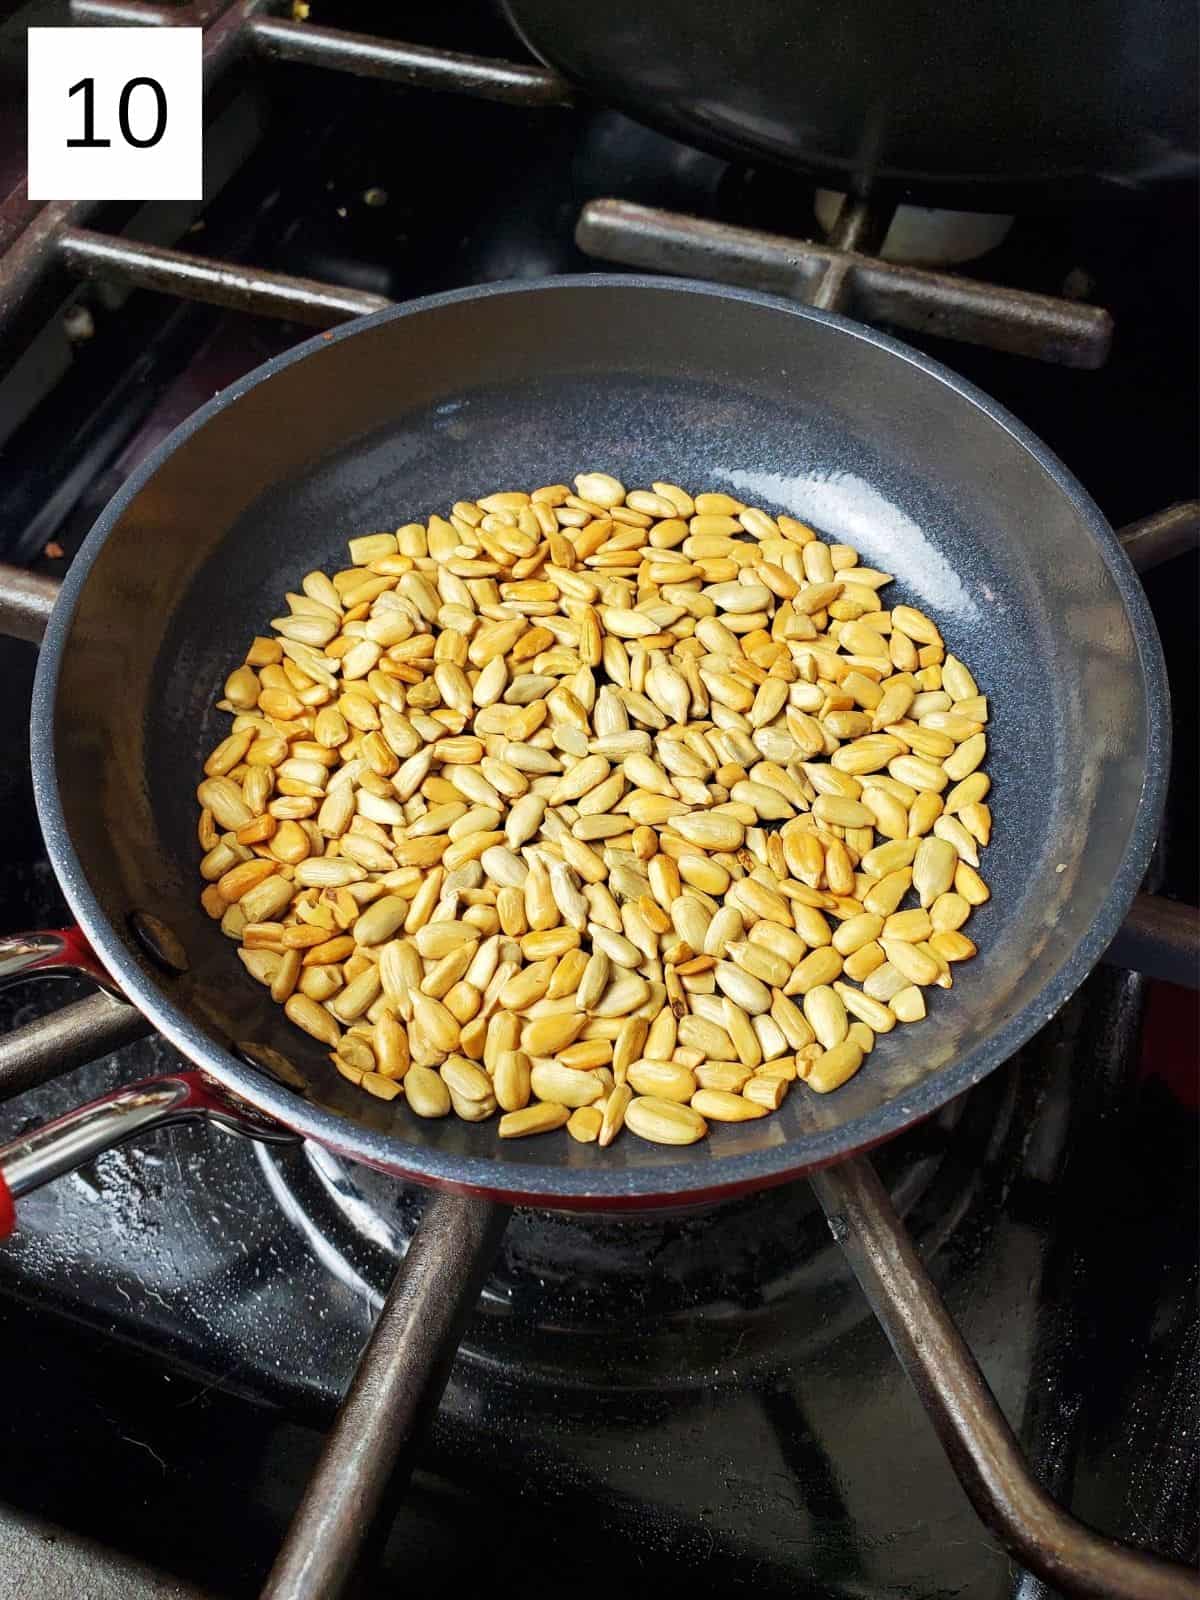 roasted sunflower seeds in a pan.